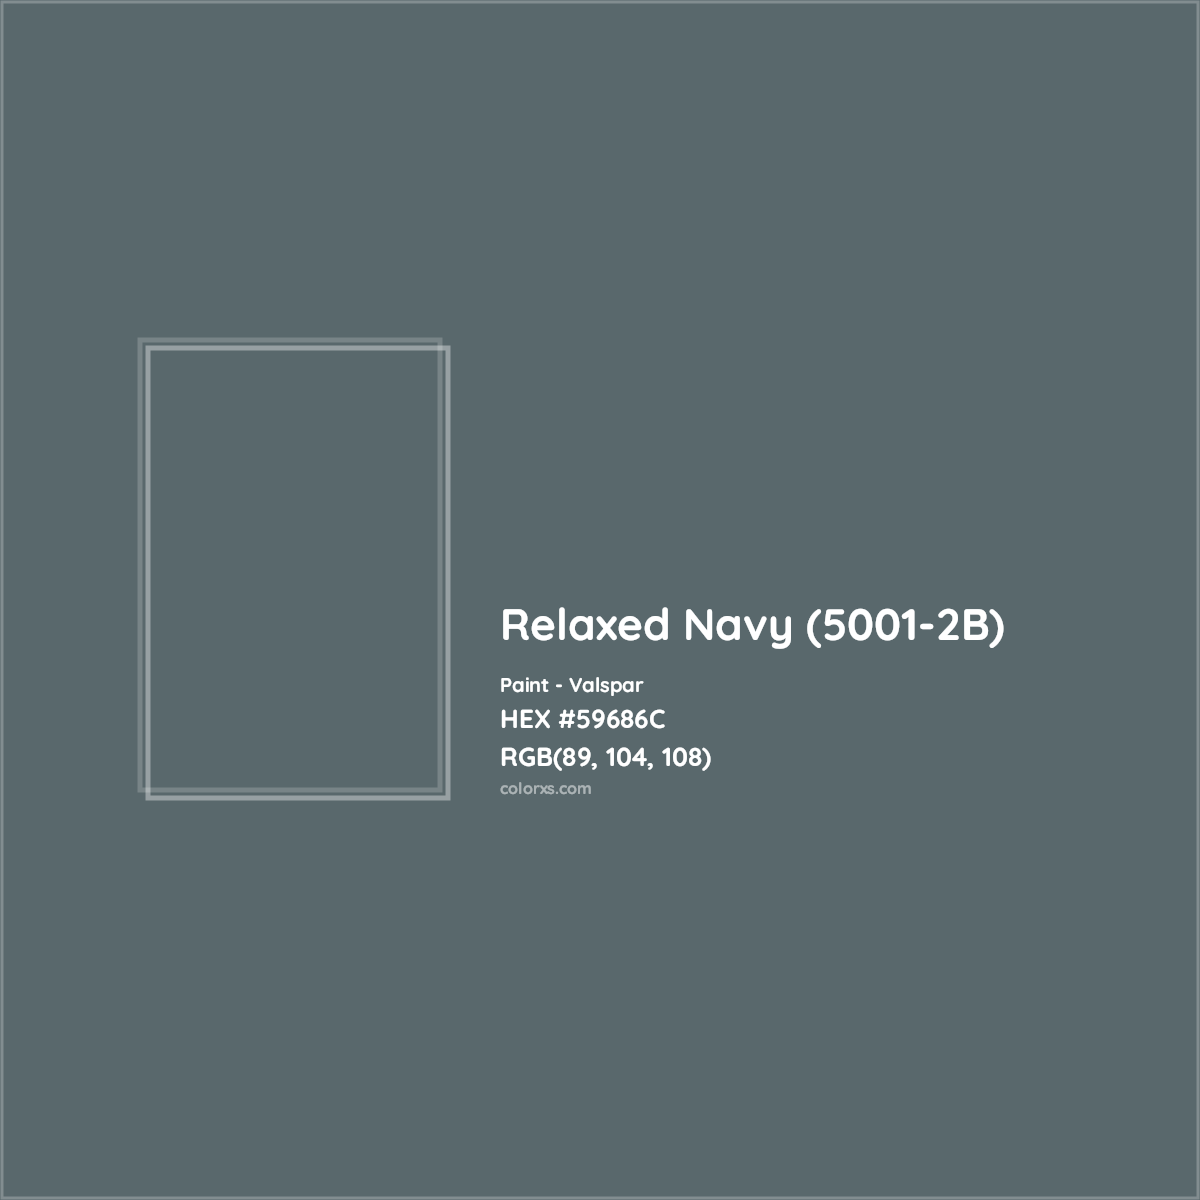 HEX #59686C Relaxed Navy (5001-2B) Paint Valspar - Color Code